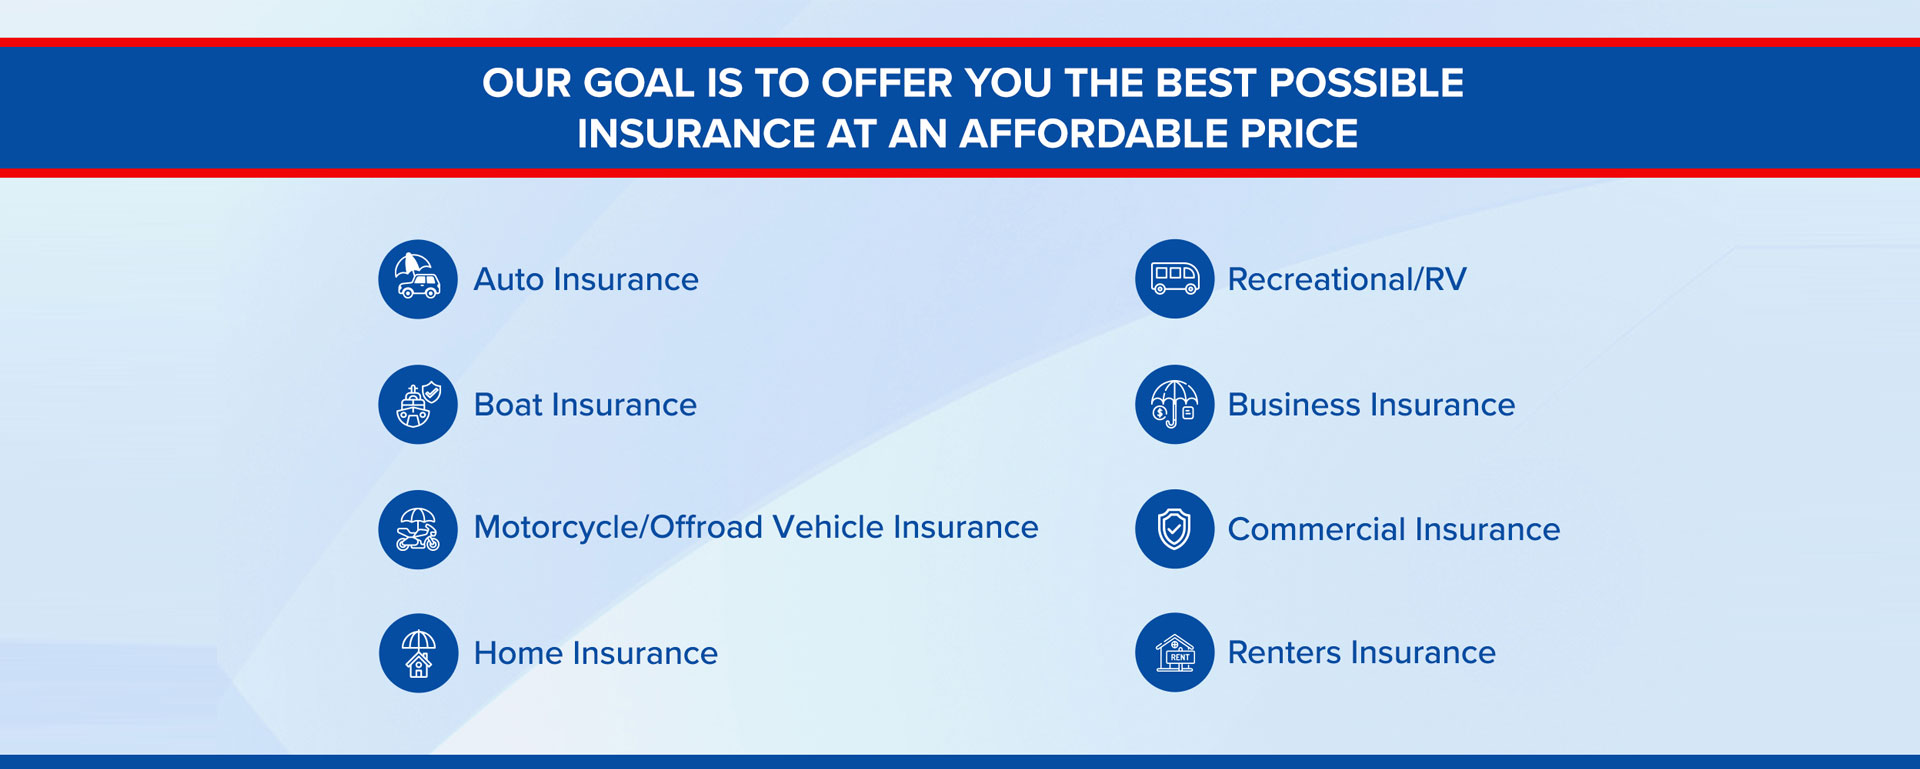 Insurance an affordable price